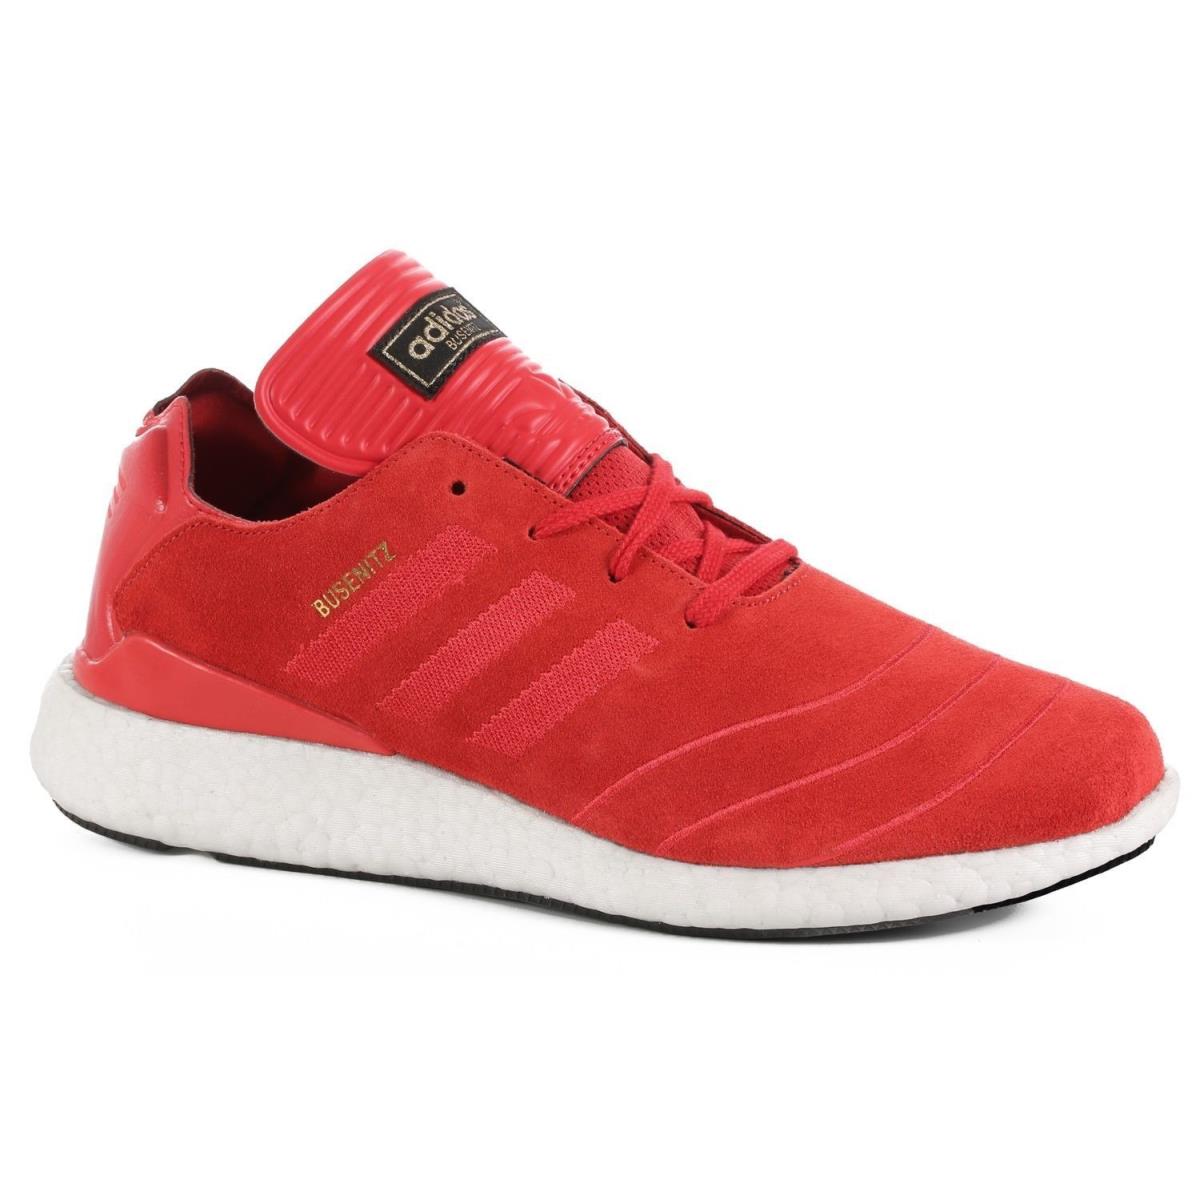 Adidas Busenitz Pure Boost Scarlet Red White F37885 351 Men`s Shoes